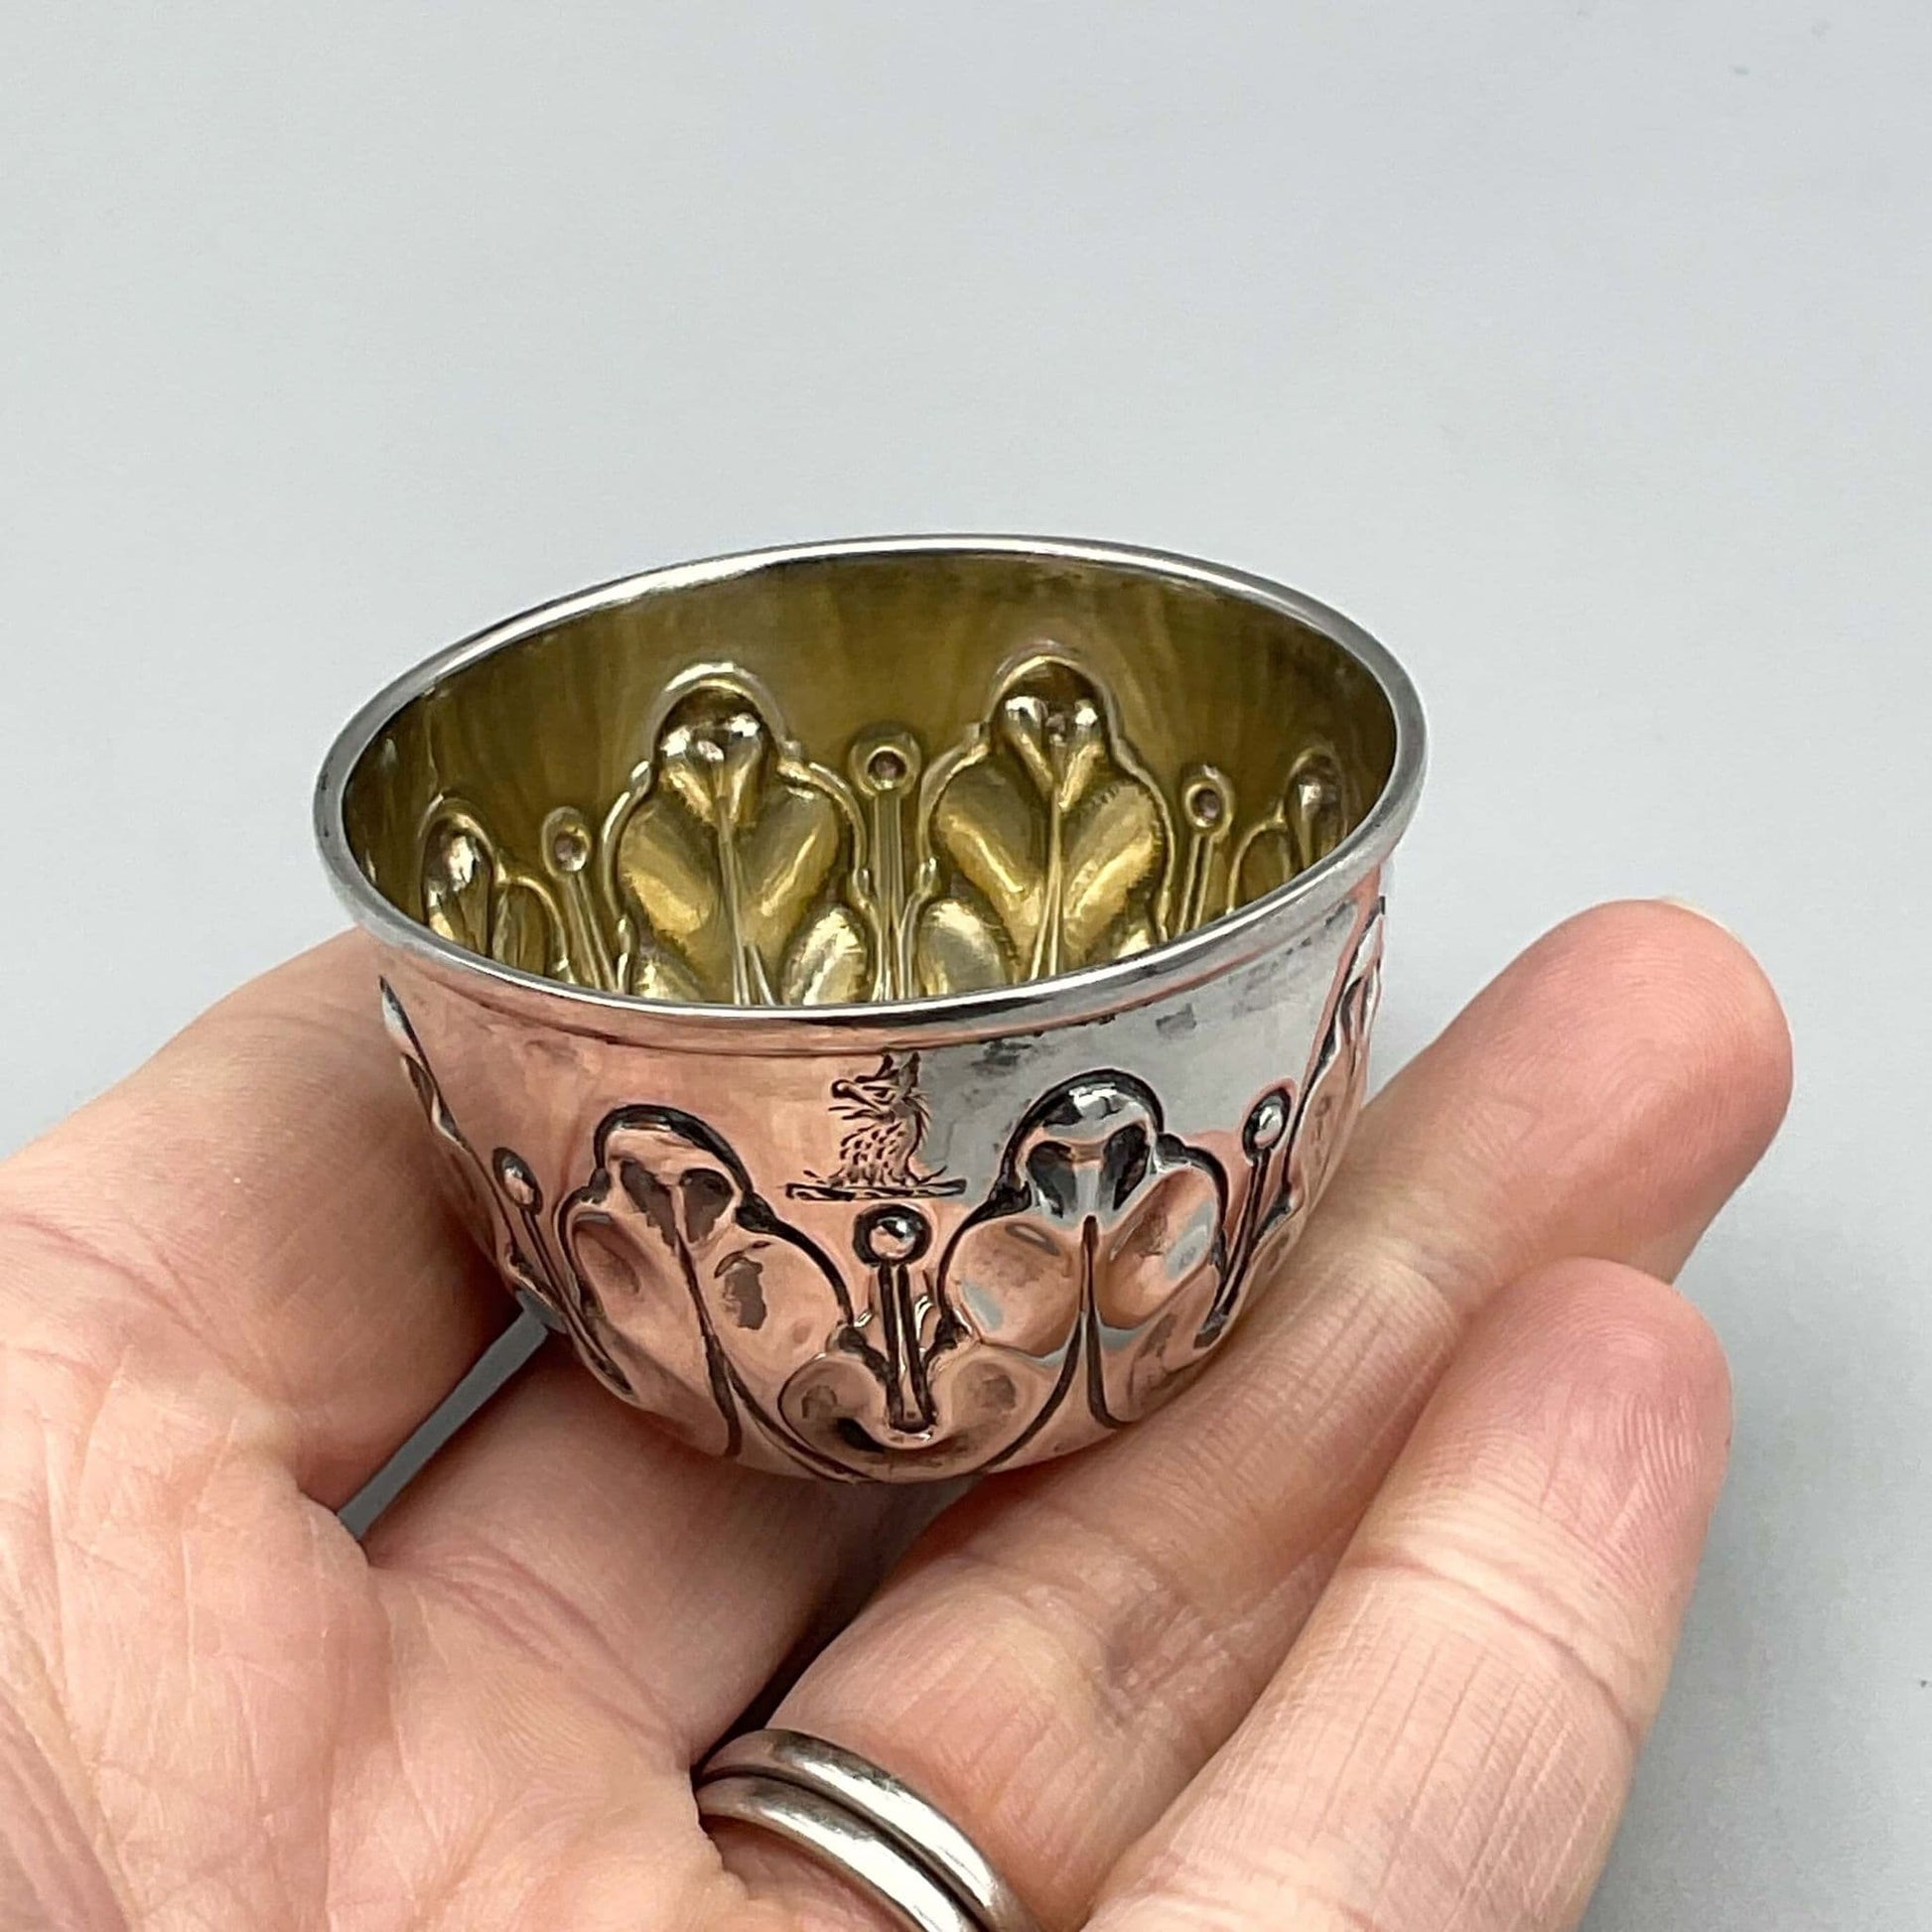 Antique Silver Salt pot with wavy design on outside and dragon motif and gilded interiorheld on hand